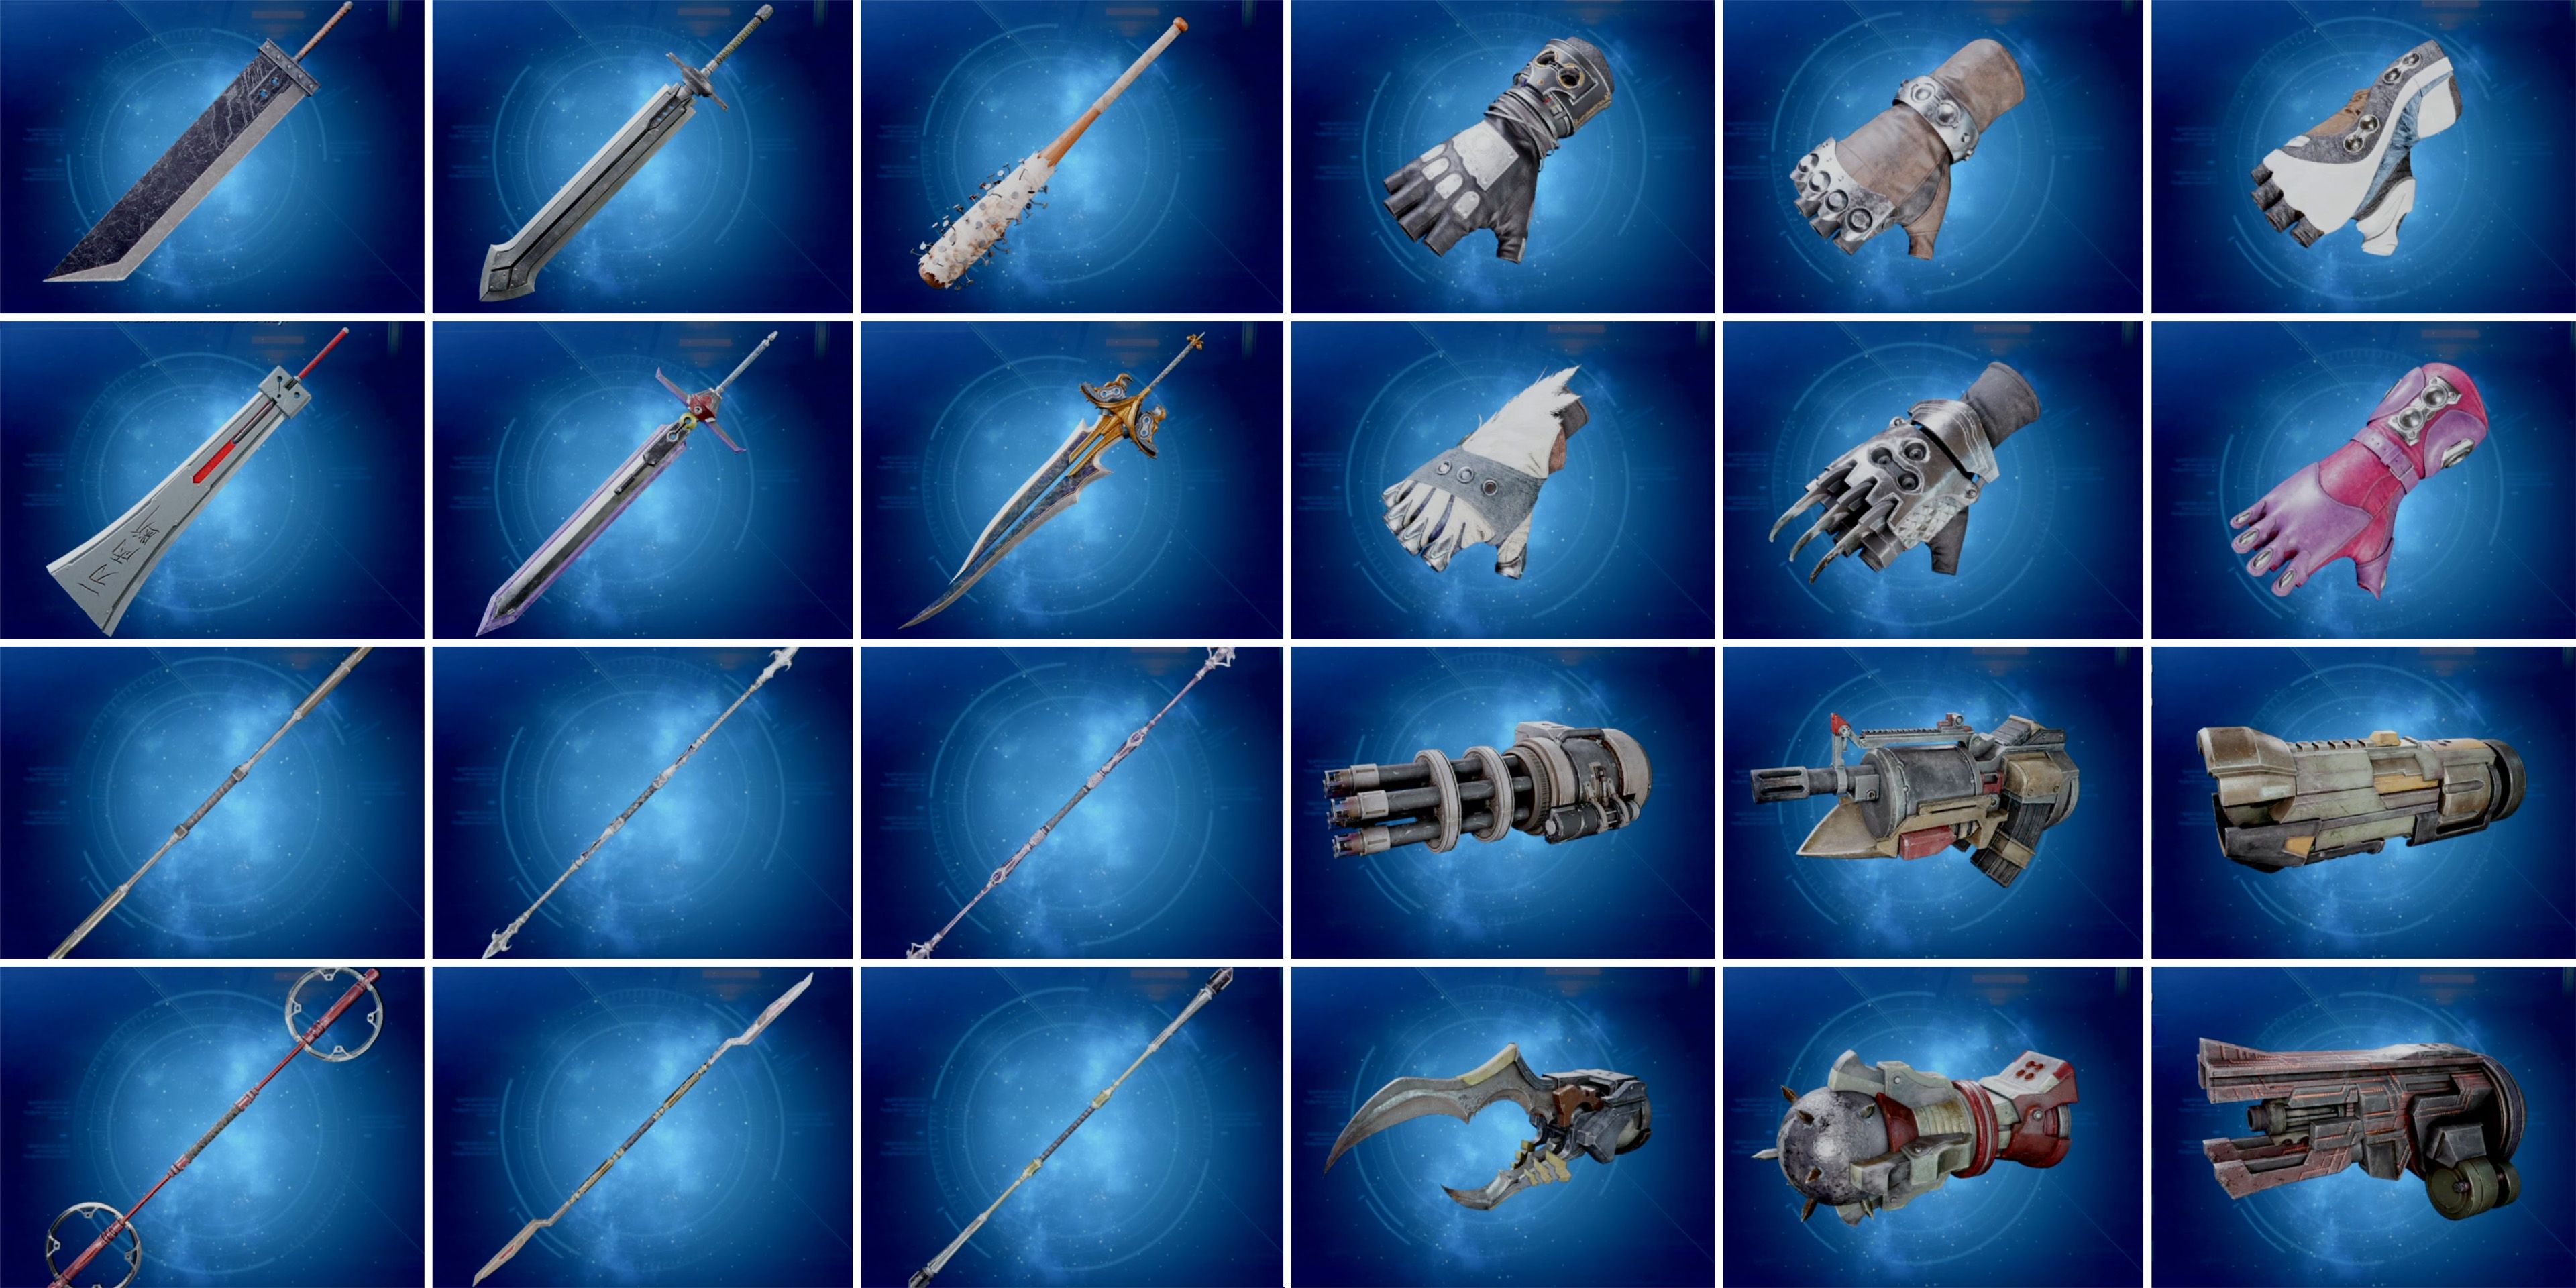 All of the weapons in Final Fantasy VII Remake